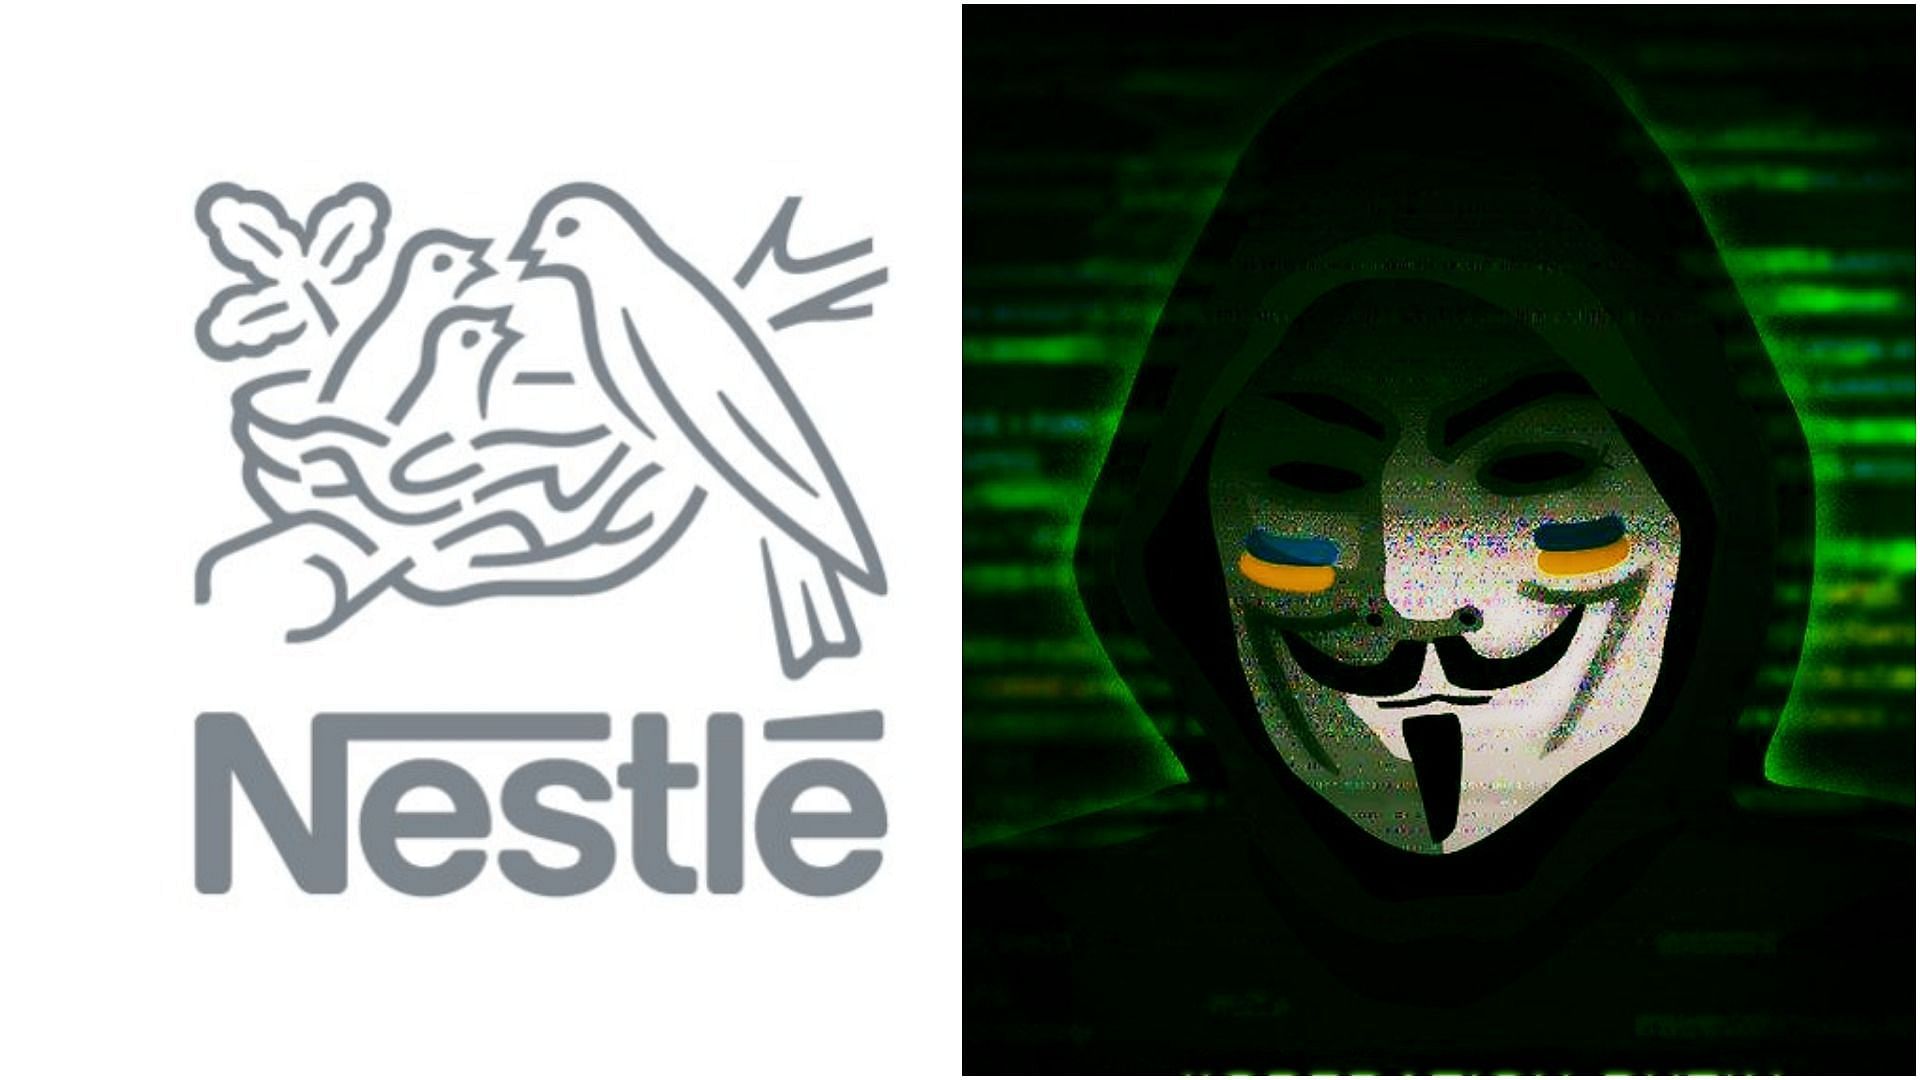 Nestle denied the claims made by Anonymous about leaking internal data (Image via @nestle and @anonymous/Facebook)